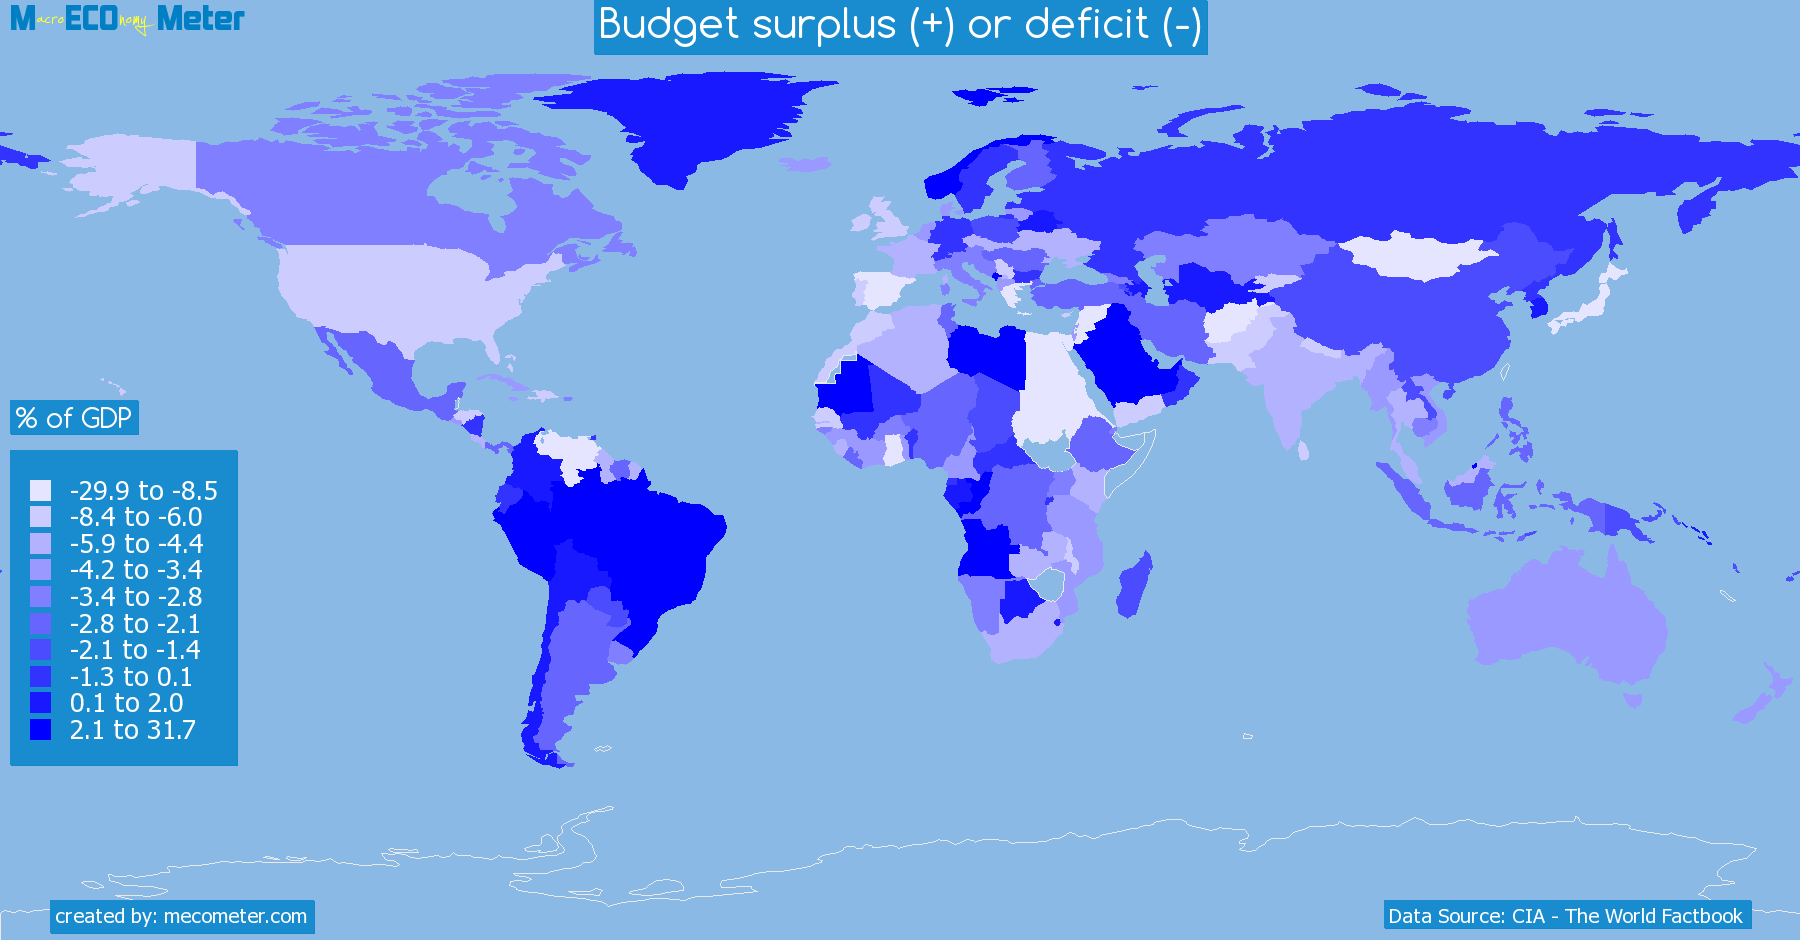 Worldmap of all countries colored to reflect the values of Budget surplus (+) or deficit (-)